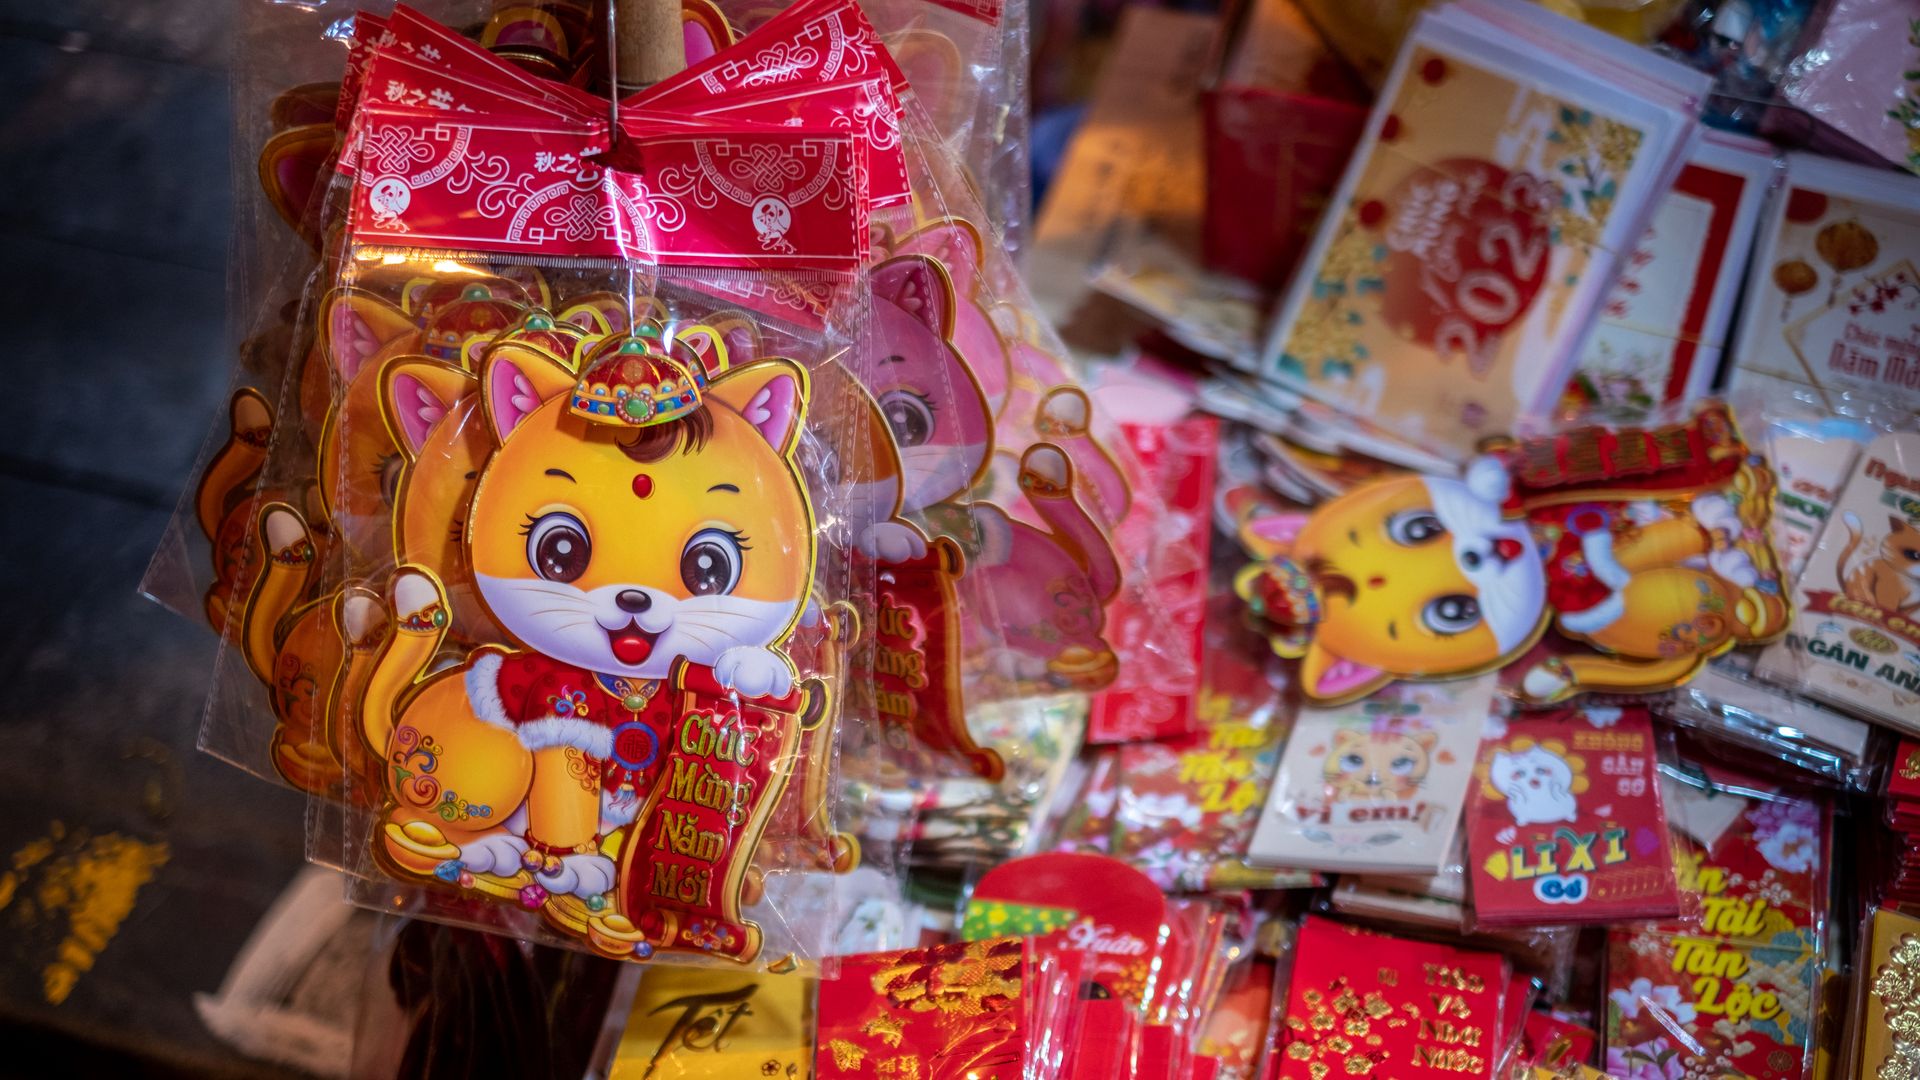 Stickers with cat image are on display at the Spring Festival Fair in the Old Quarter on January 14, 2023 in Hanoi, Vietnam